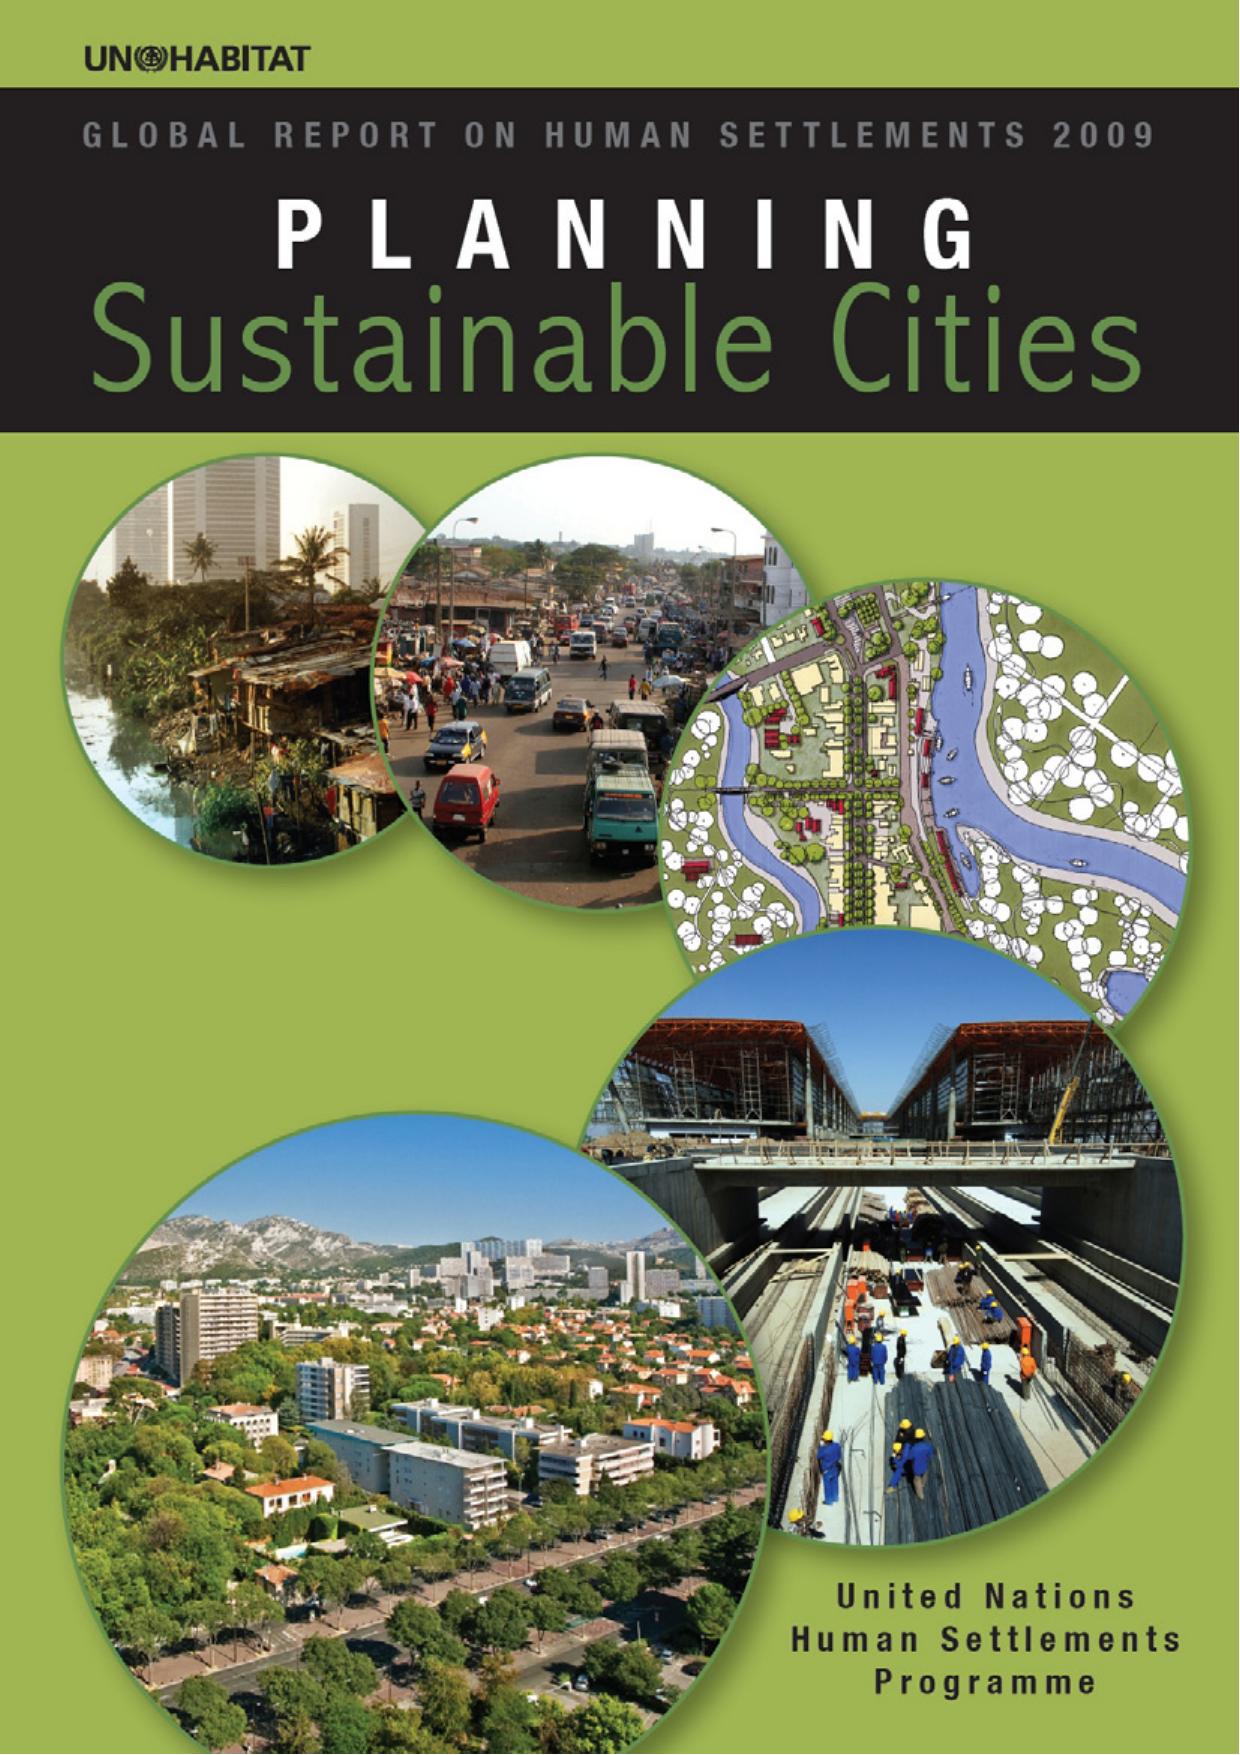 Planning Sustainable Cities: Global Report on Human Settlements 2009 (Full report)